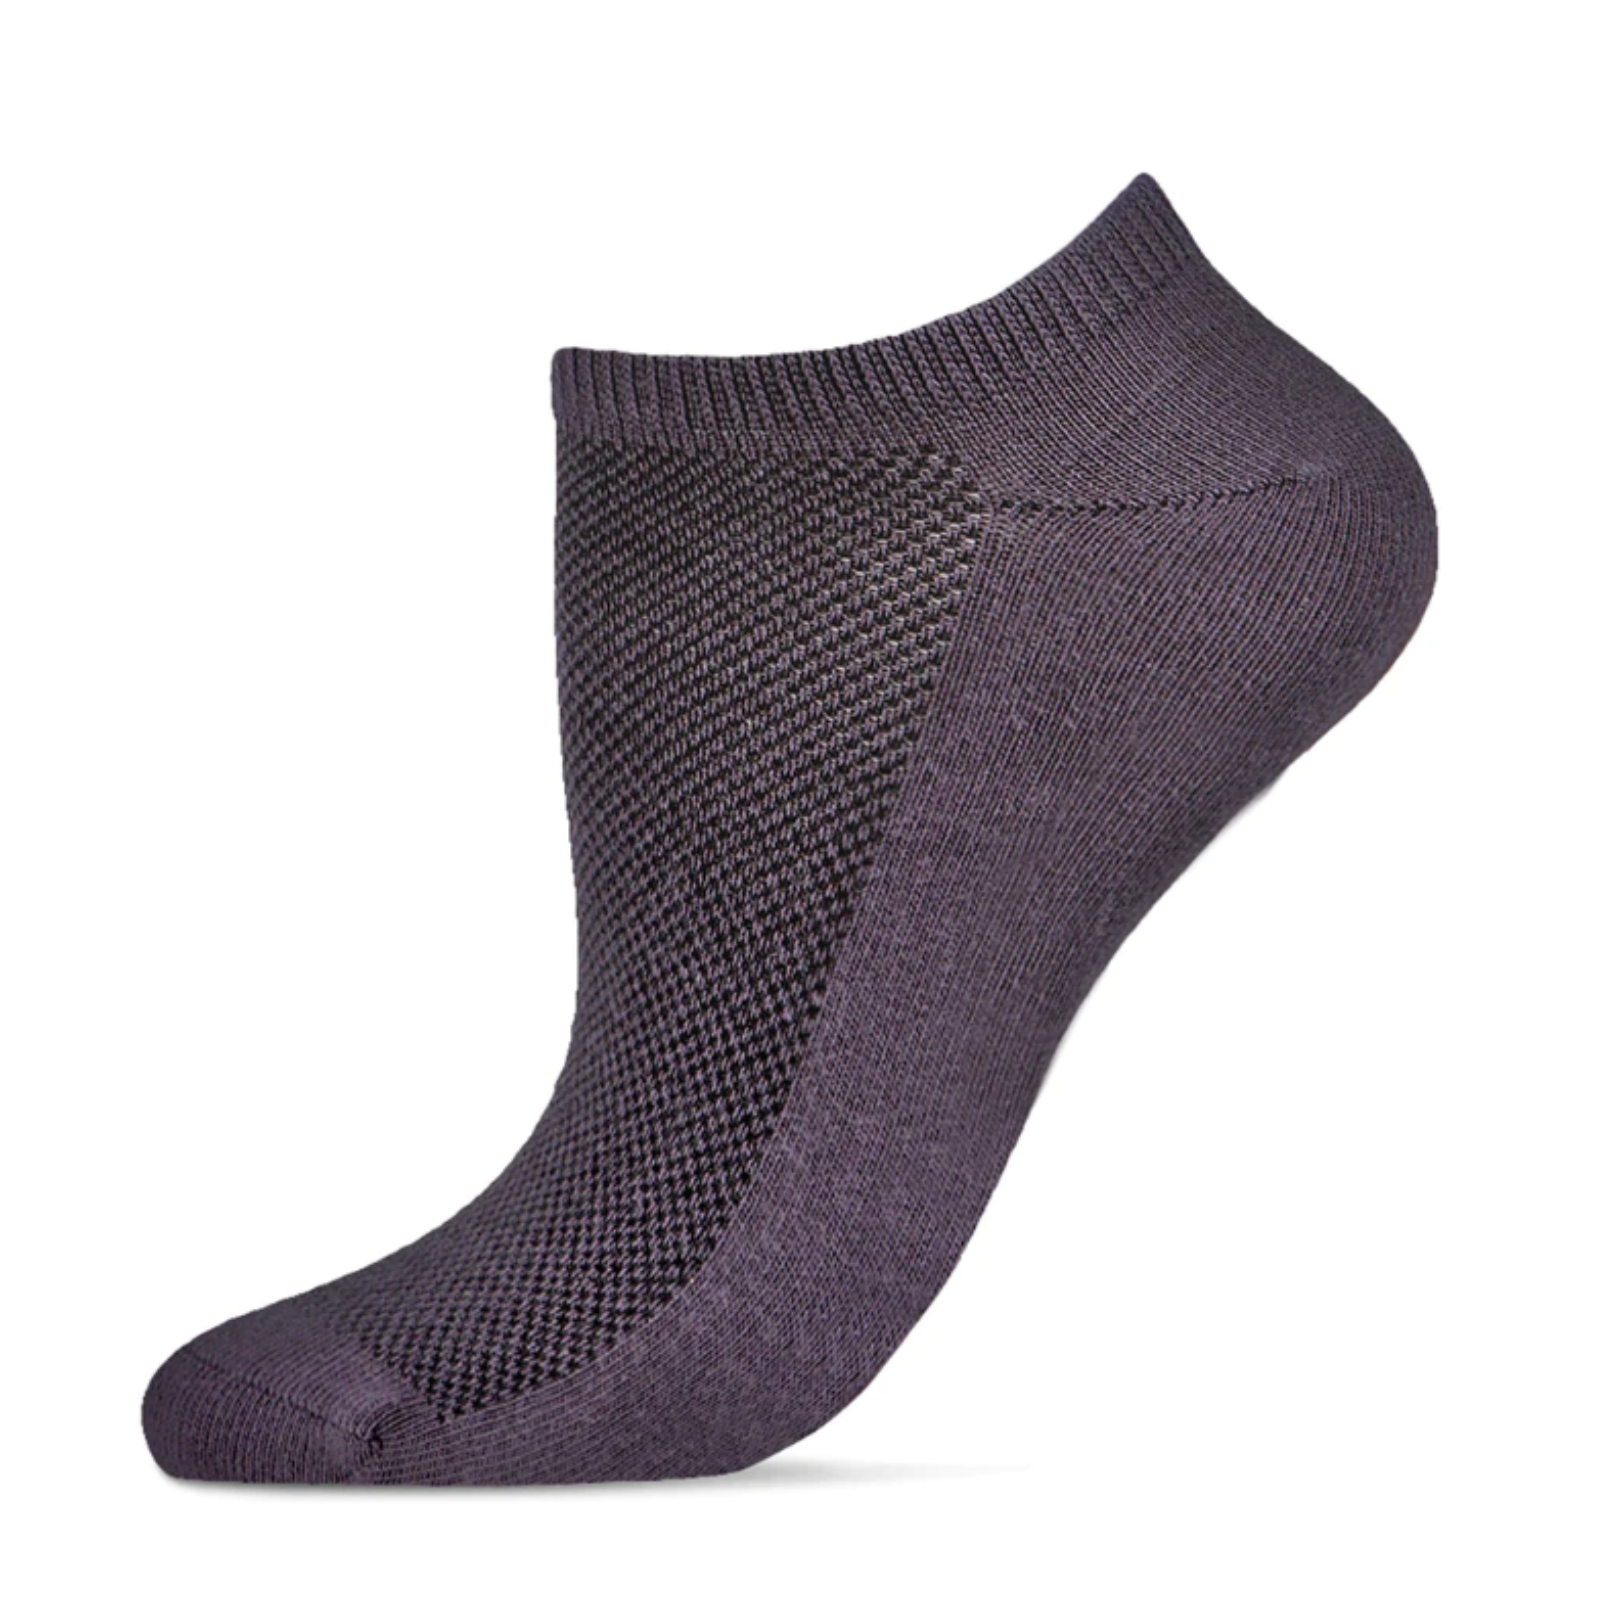 MeMoi Organic Cotton Mesh Top Breathable Liner women's sock in Earl Gray on display from side